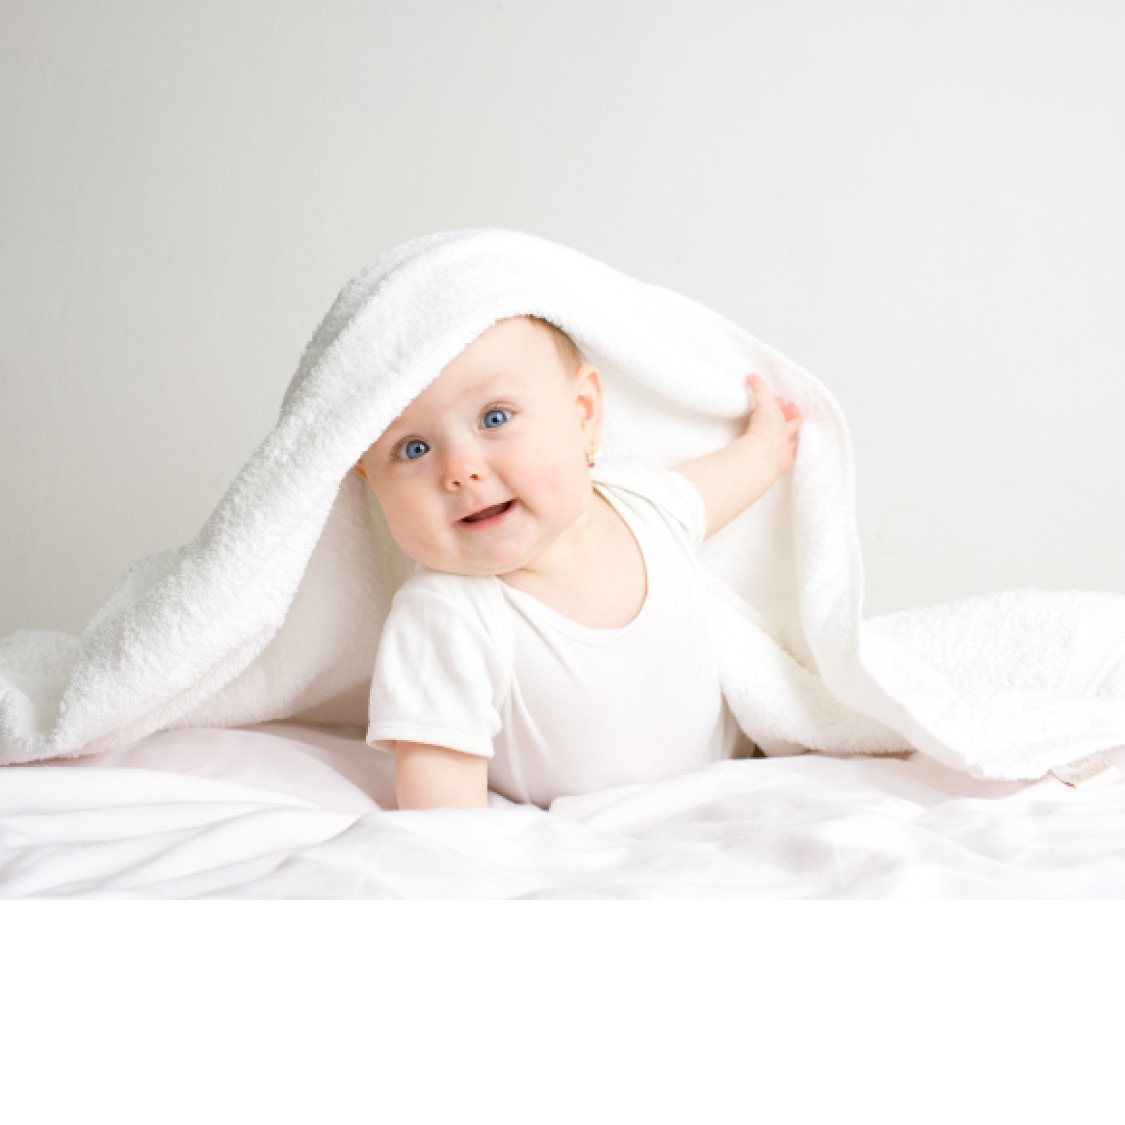 This baby is playing peek-a-boo under a blanket Babies learn by trying - photo 5